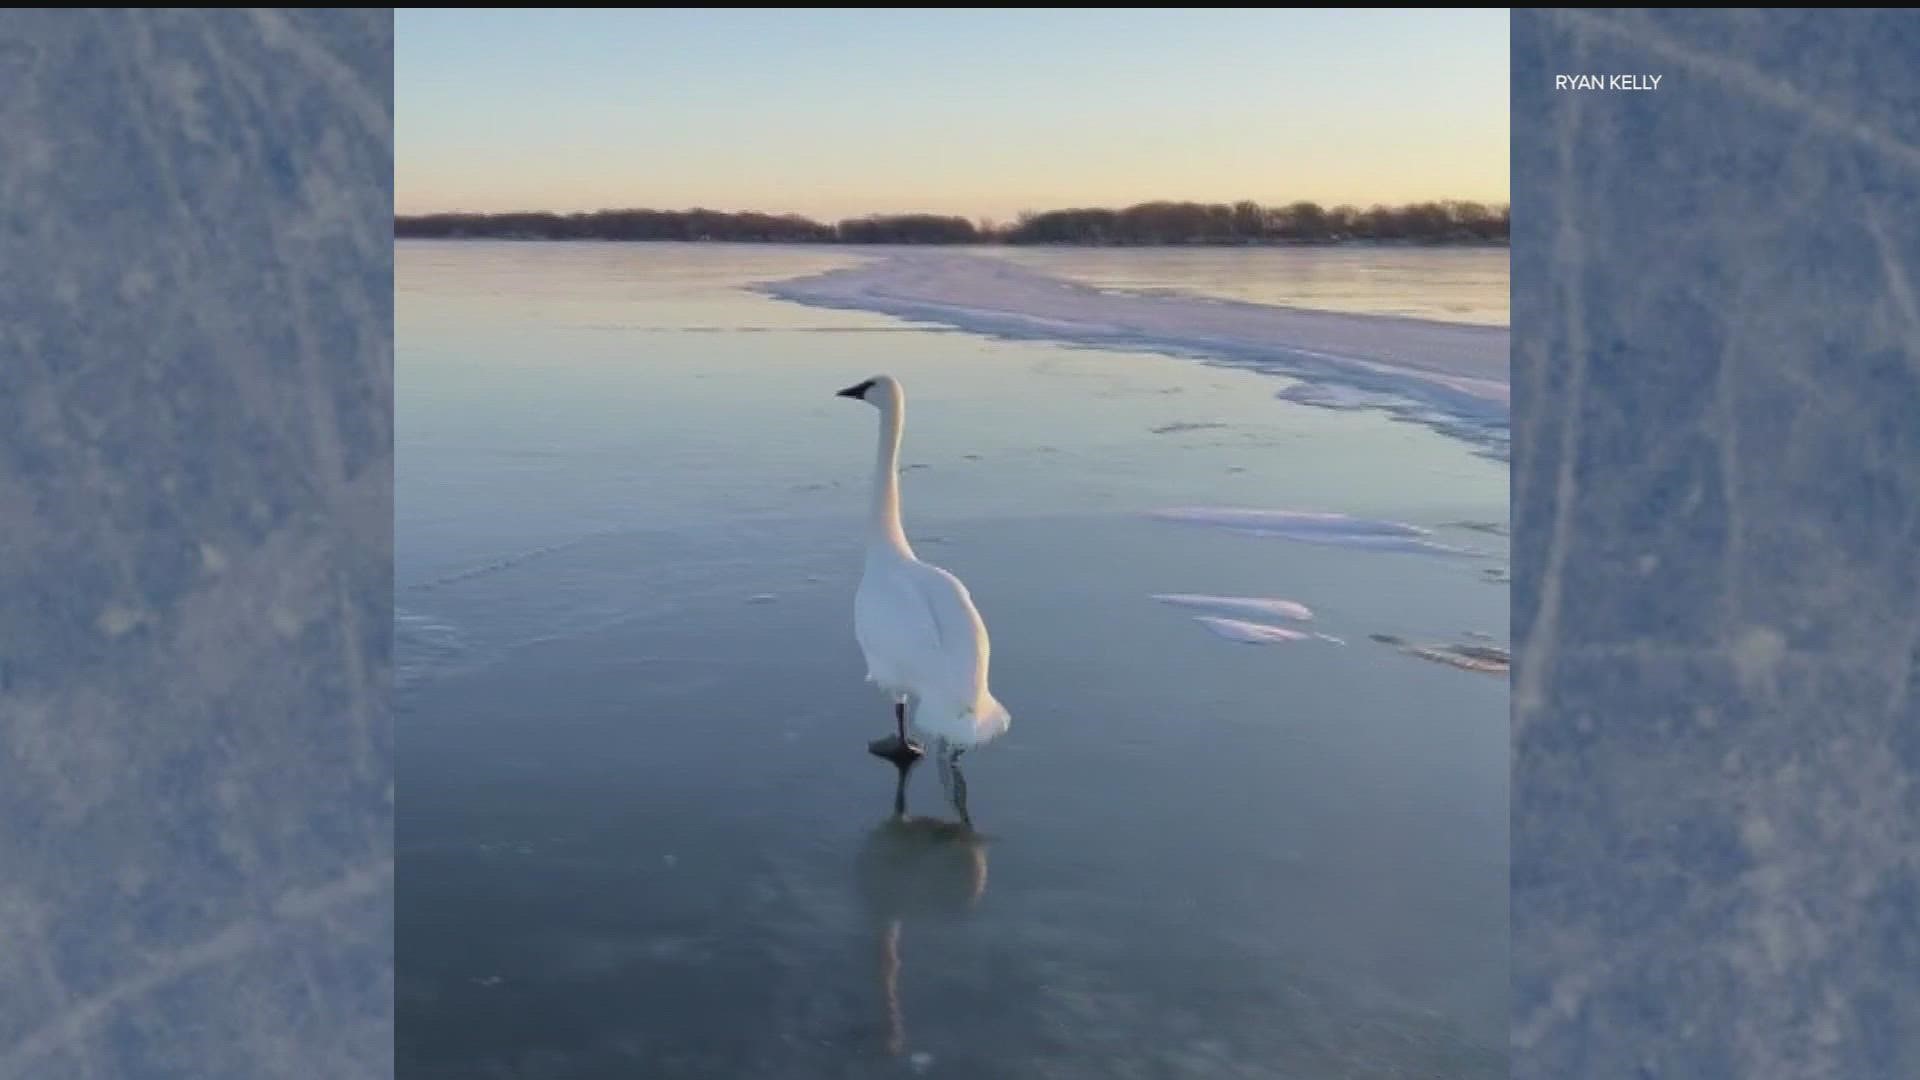 Three buddies from the Twin Cities worked together to help free a swan on Saturday night that was stuck on the lake.